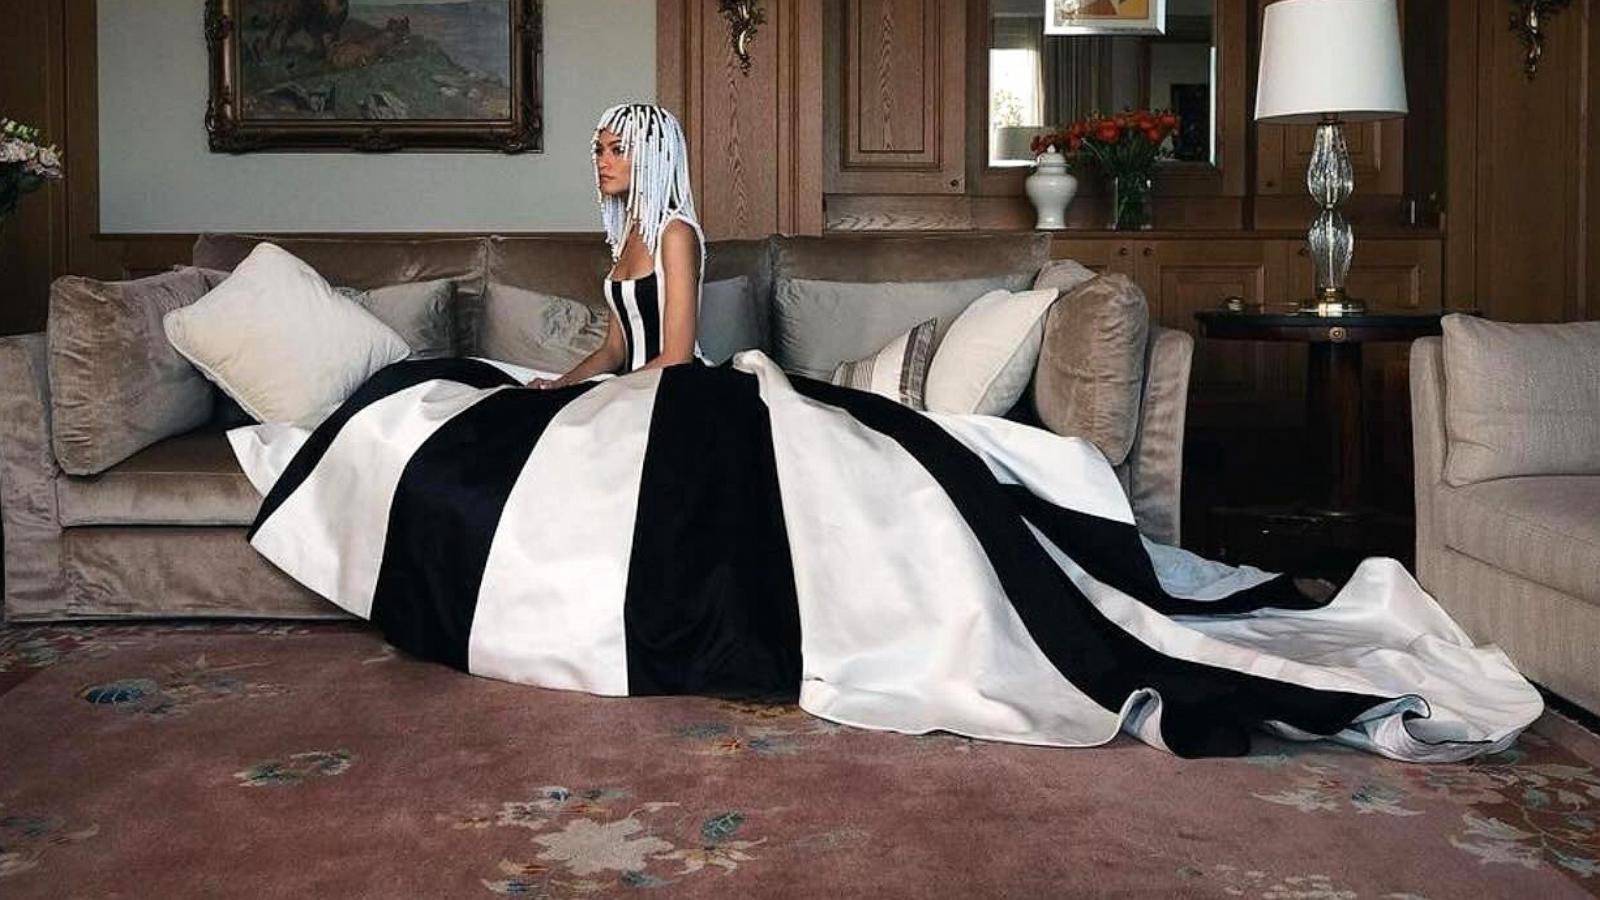 PHOTO: Zendaya wears a striped black and white gown from Carolina Herrera in this image.